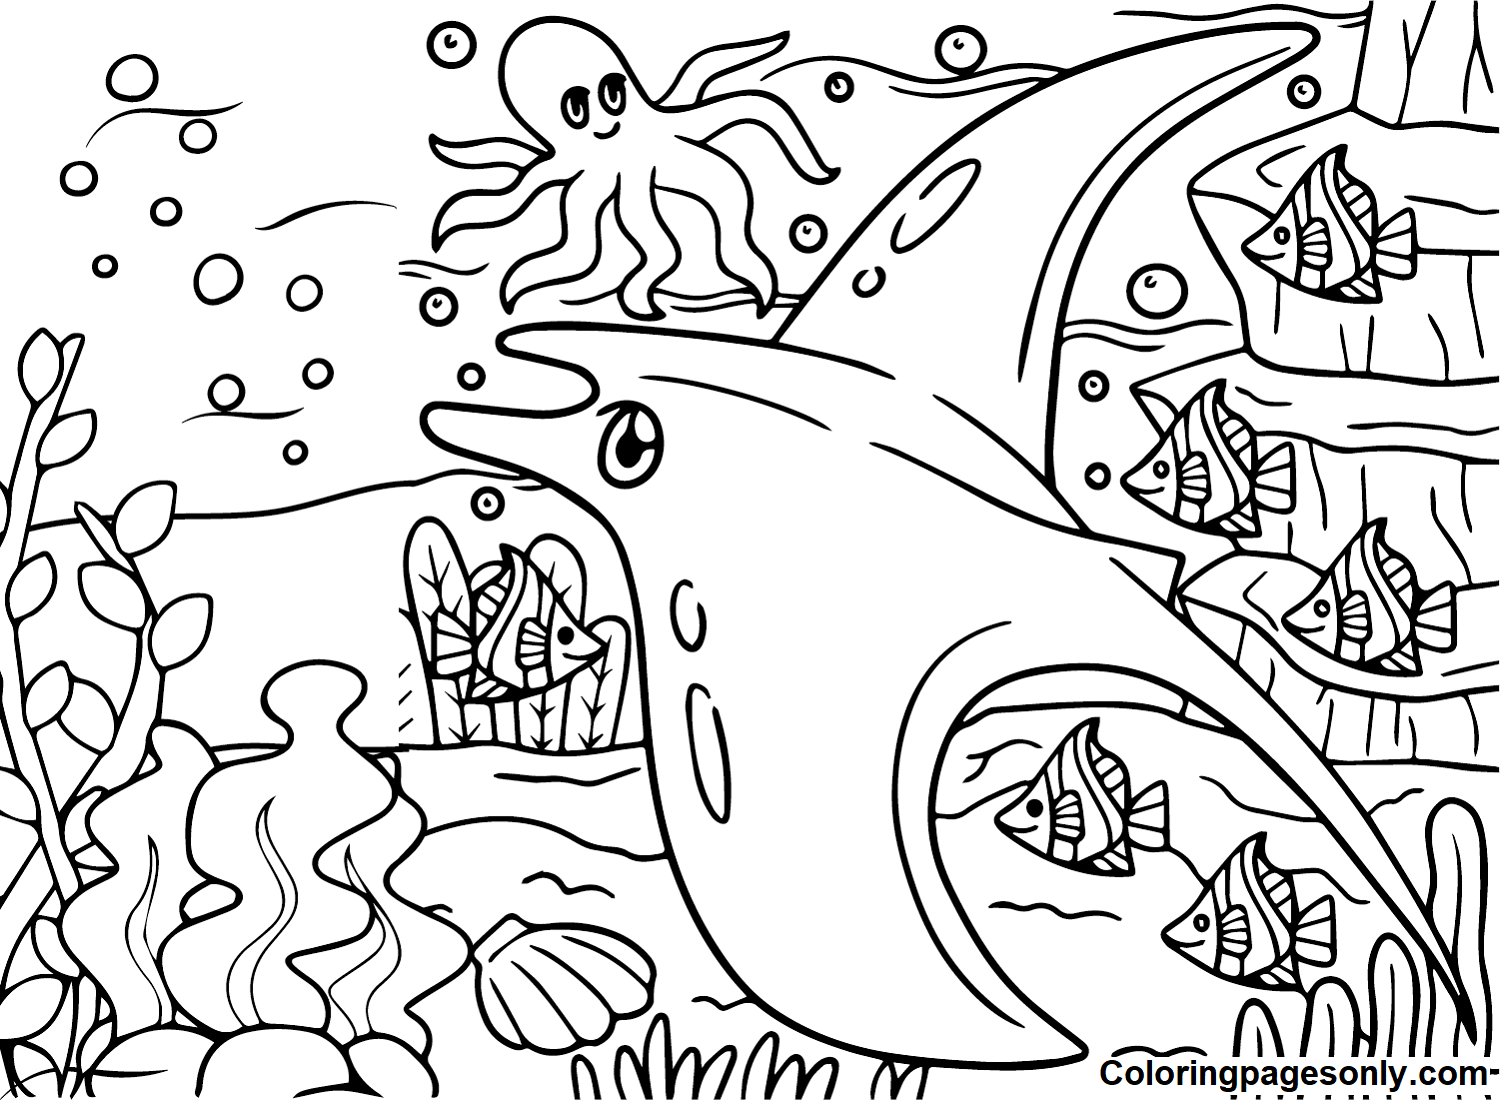 Stingray and Octopus Coloring Pages